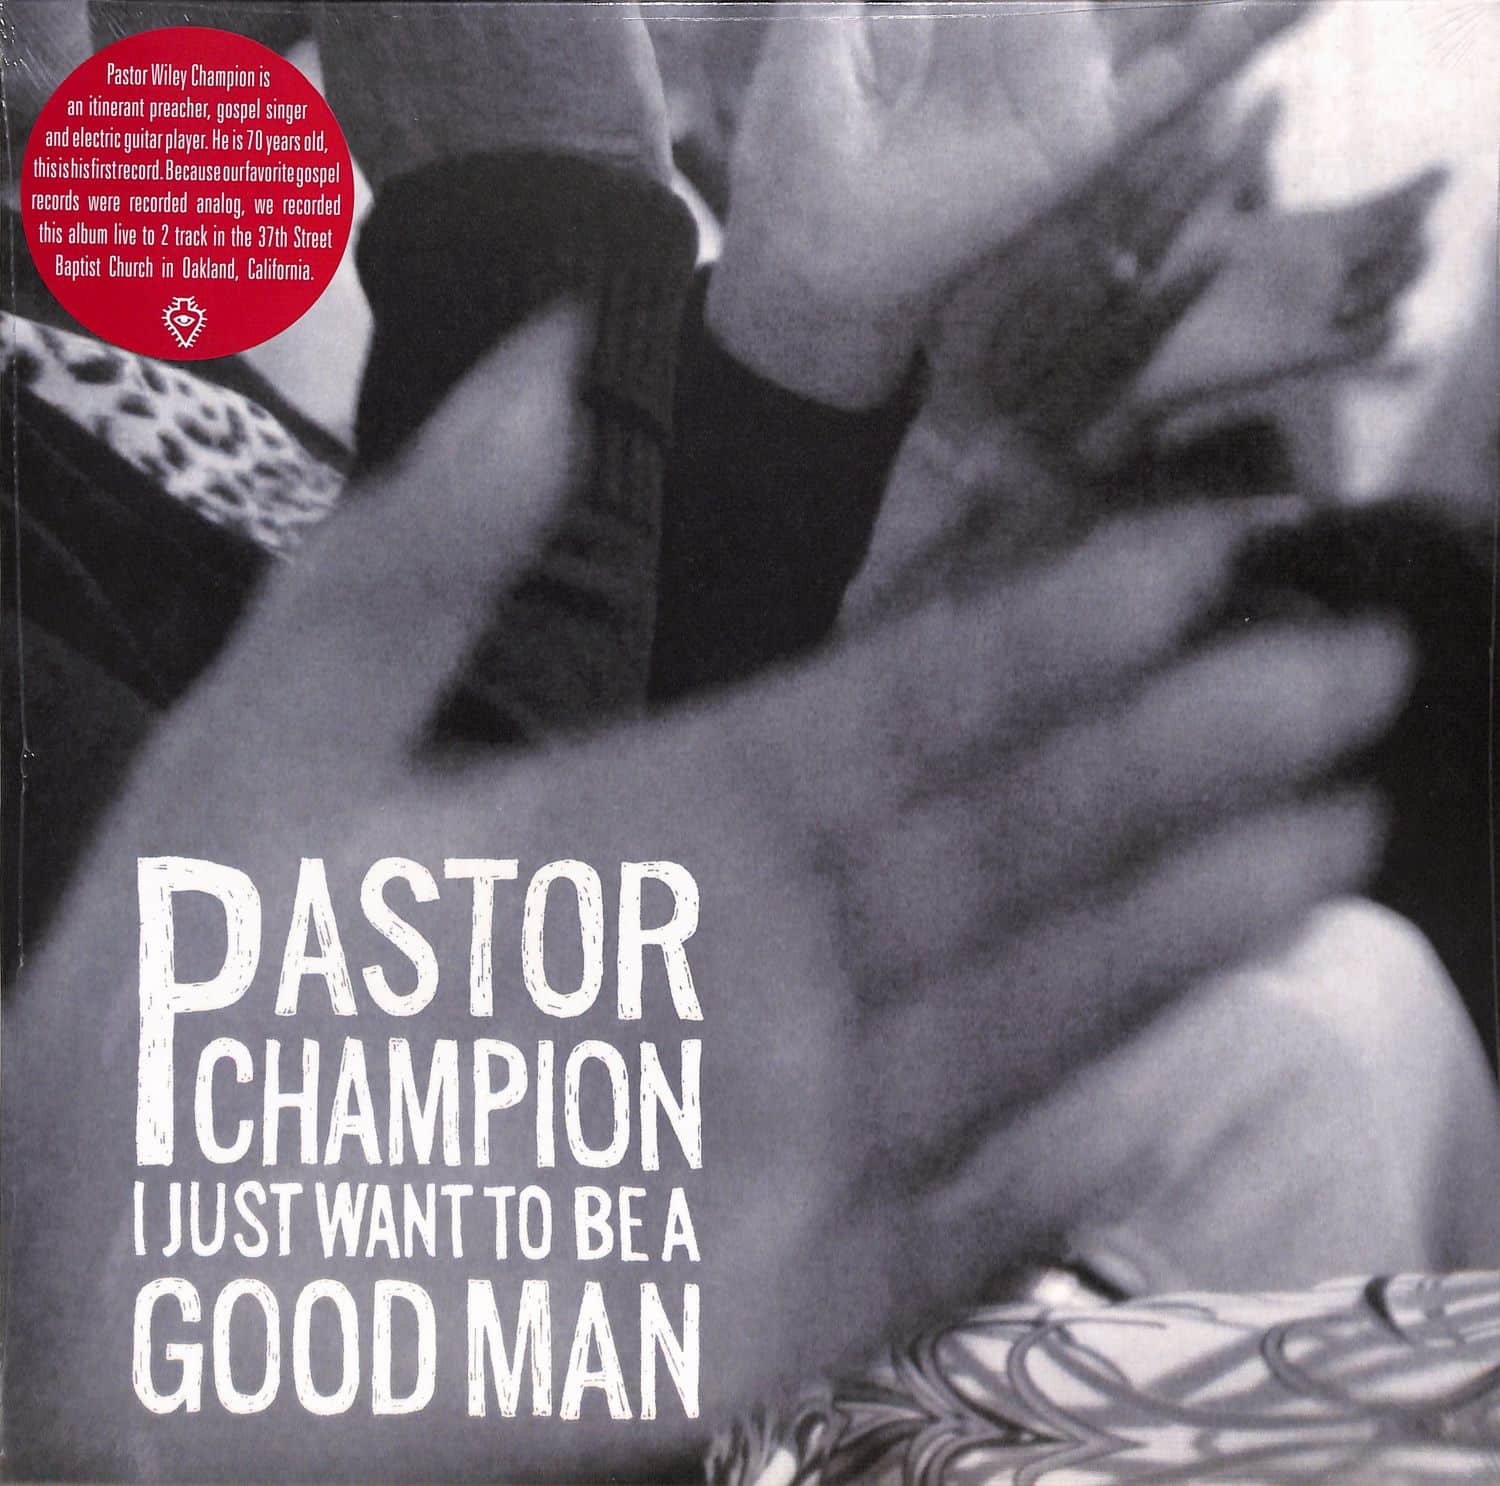 Pastor Champion - I JUST WANT TO BE A GOOD MAN 